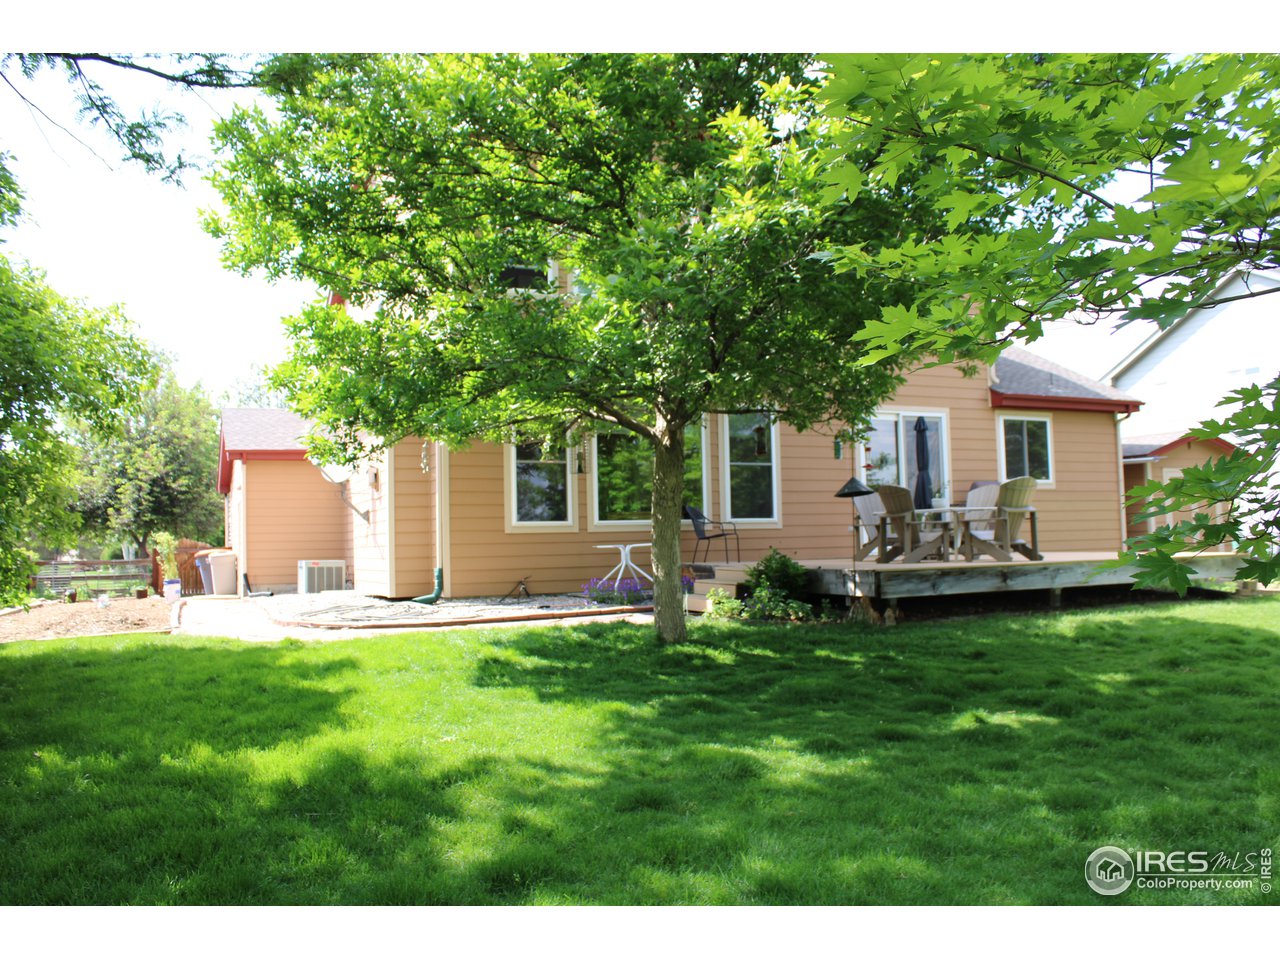 Great back yard with good space between houses, central air conditioning, mature landscaping.